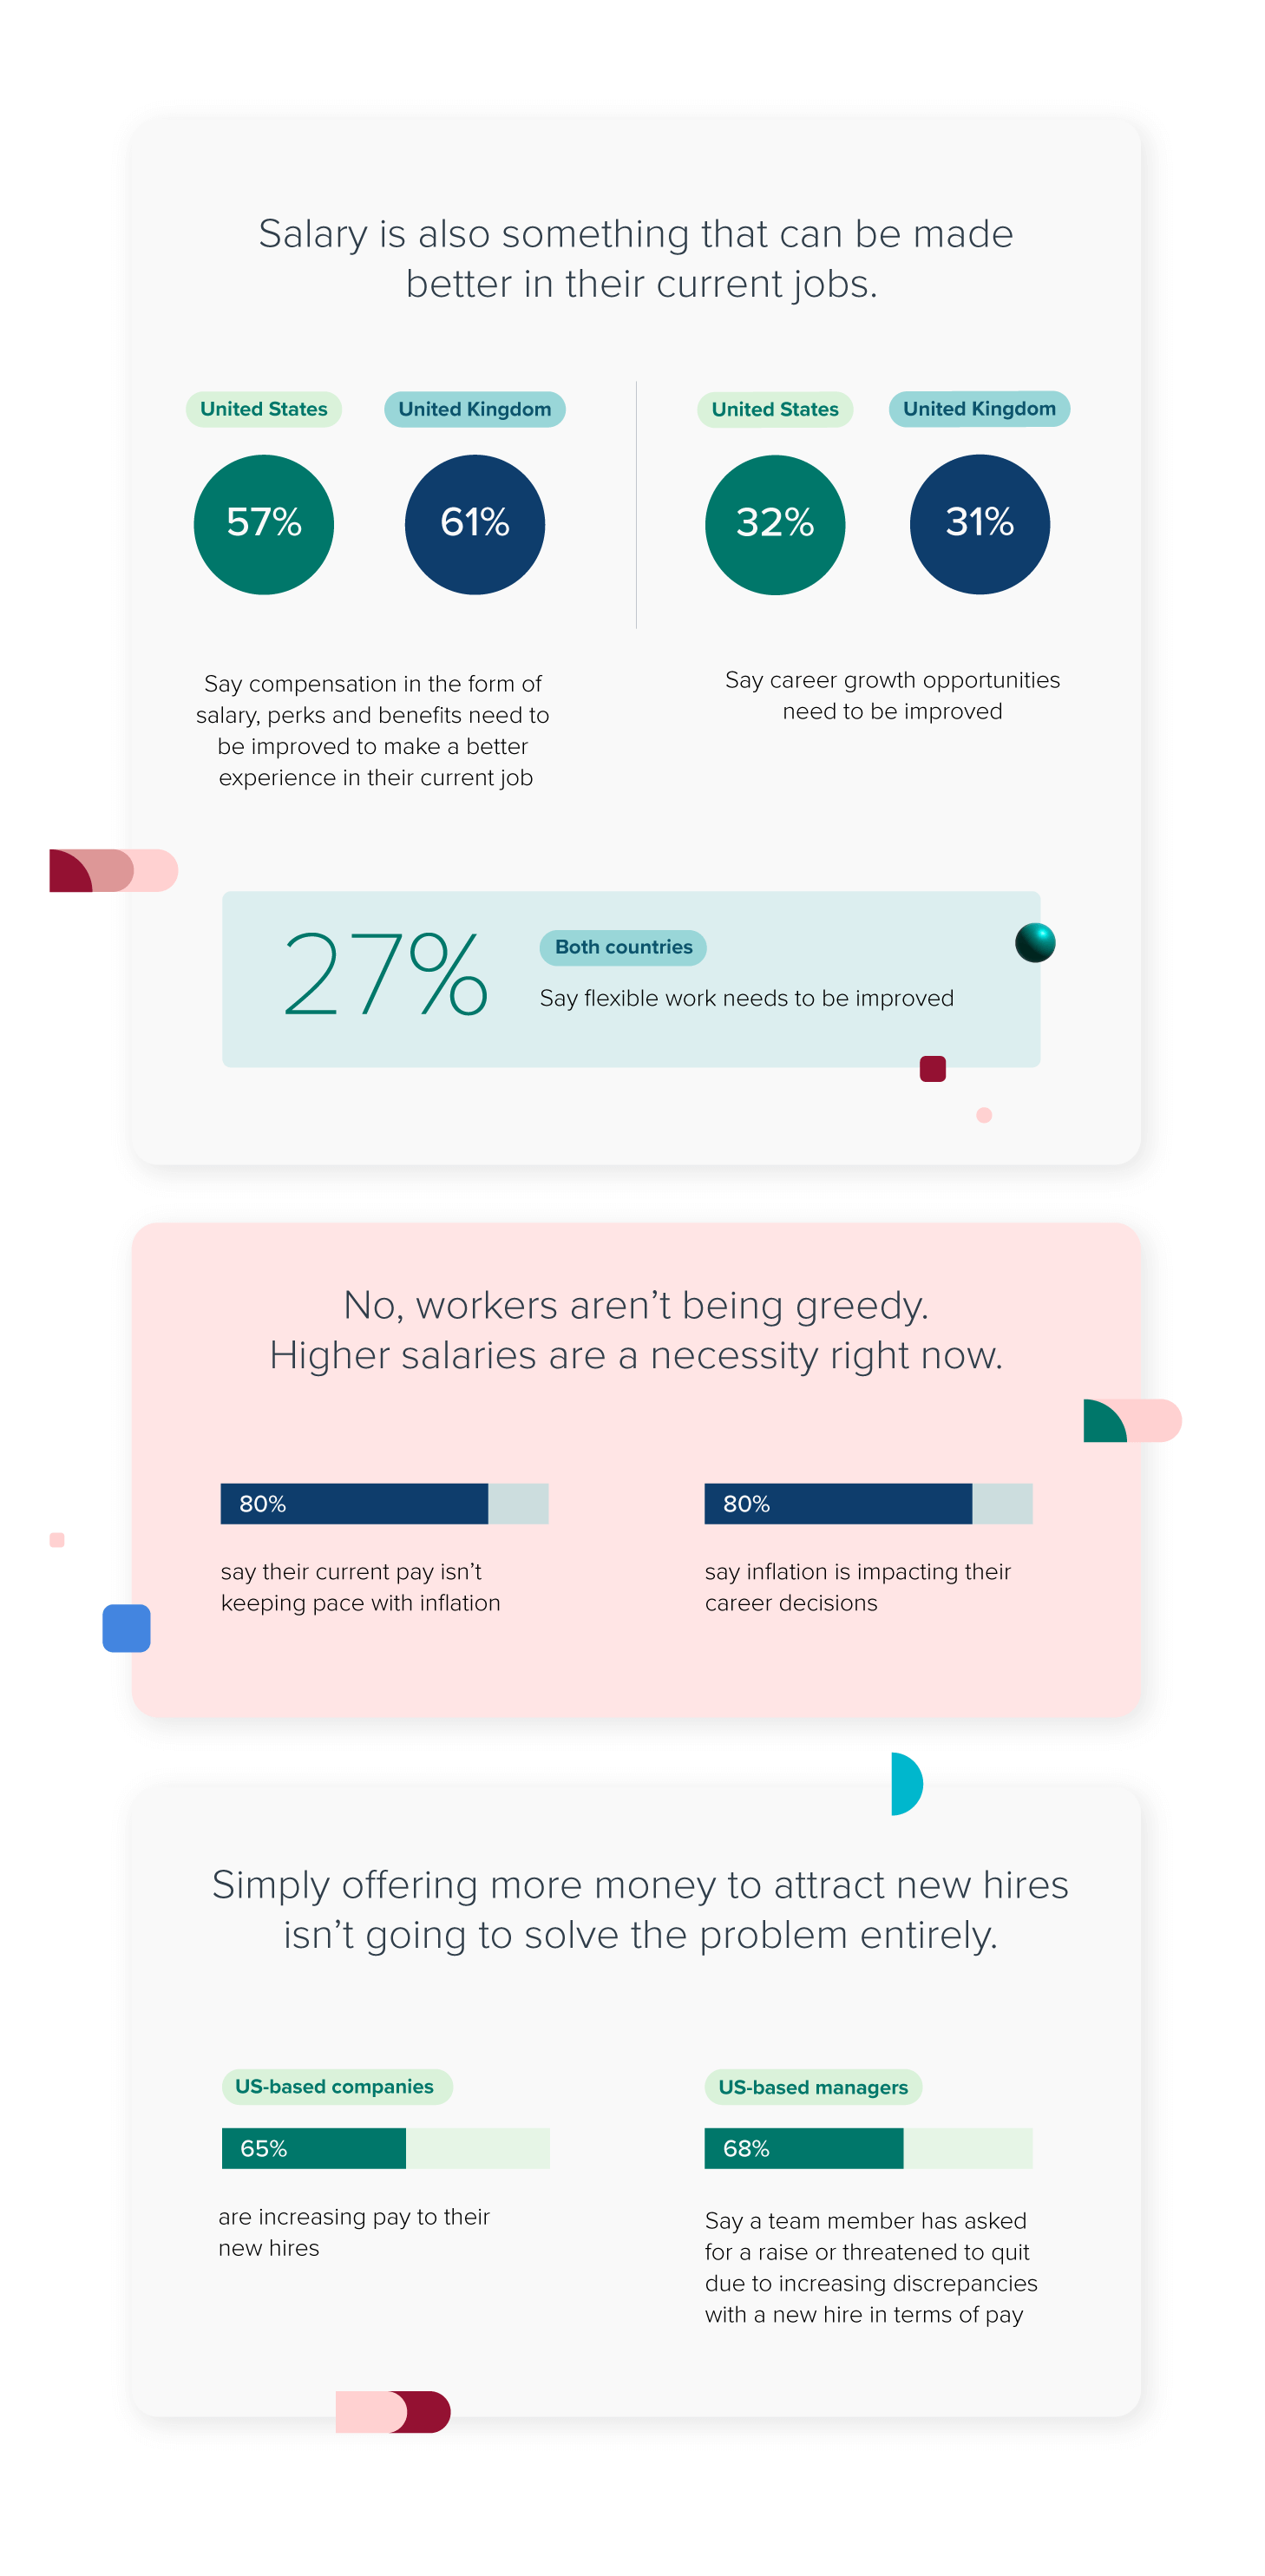  Salary is also something that can be made better in their current jobs. 61% in the UK and 57% in the US say compensation in the form of salary, perks and benefits need to be improved to make a better experience in their current job. That’s much higher than career growth opportunities (31% in UK, 32% in US) and even flexible work (27% in both countries). No, workers aren’t being greedy. Better salaries are a necessity right now. 80% worldwide say their current pay isn’t keeping pace with inflation 80% of workers say inflation is impacting their career decisions Simply offering more money to attract new hires isn’t going to solve the problem entirely. 65% of US-based companies are increasing pay to their new hires. But this is leading to dissent: 68% of managers in the US say a team member has asked for a raise or threatened to quit due to increasing discrepancies with a new hire in terms of pay. 